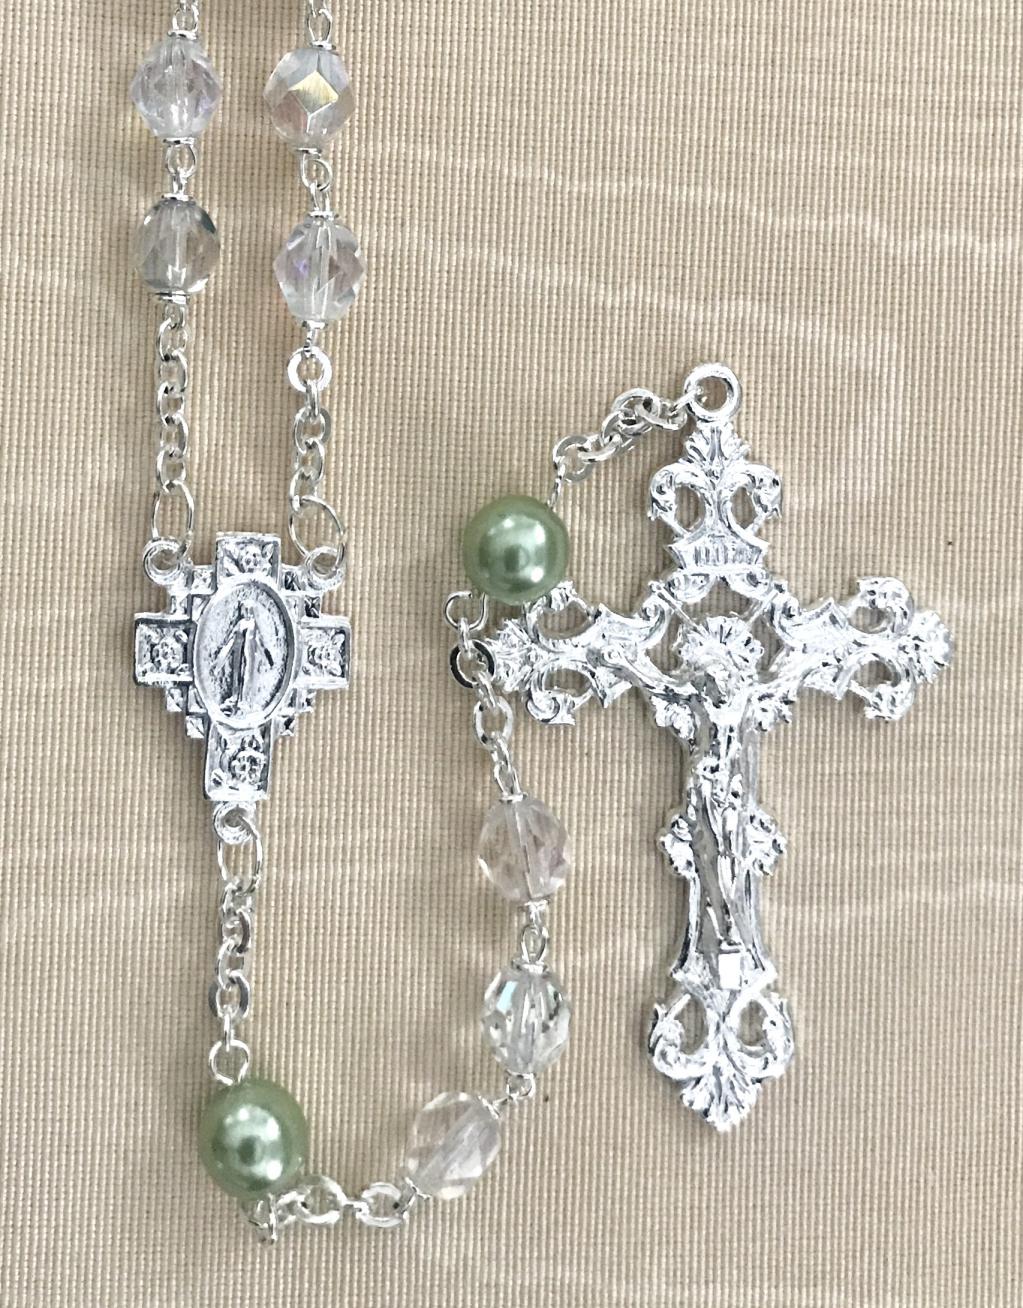 7mm CRYSTAL AB WITH PERIDOT PEARL OUR FATHER BEADS STERLING SILVER PLATED ROSARY GIFT BOXED